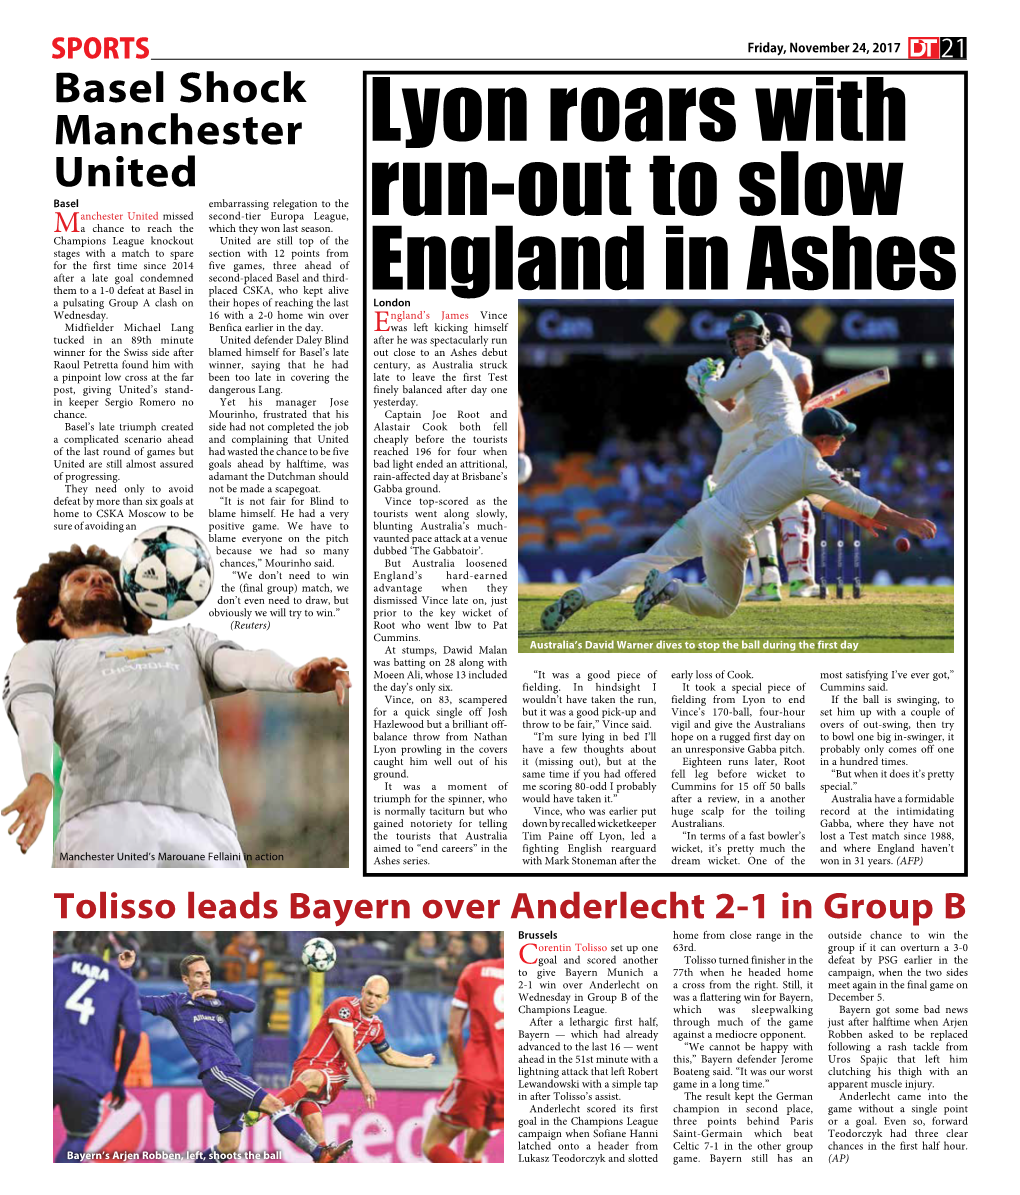 Lyon Roars with Run-Out to Slow England in Ashes